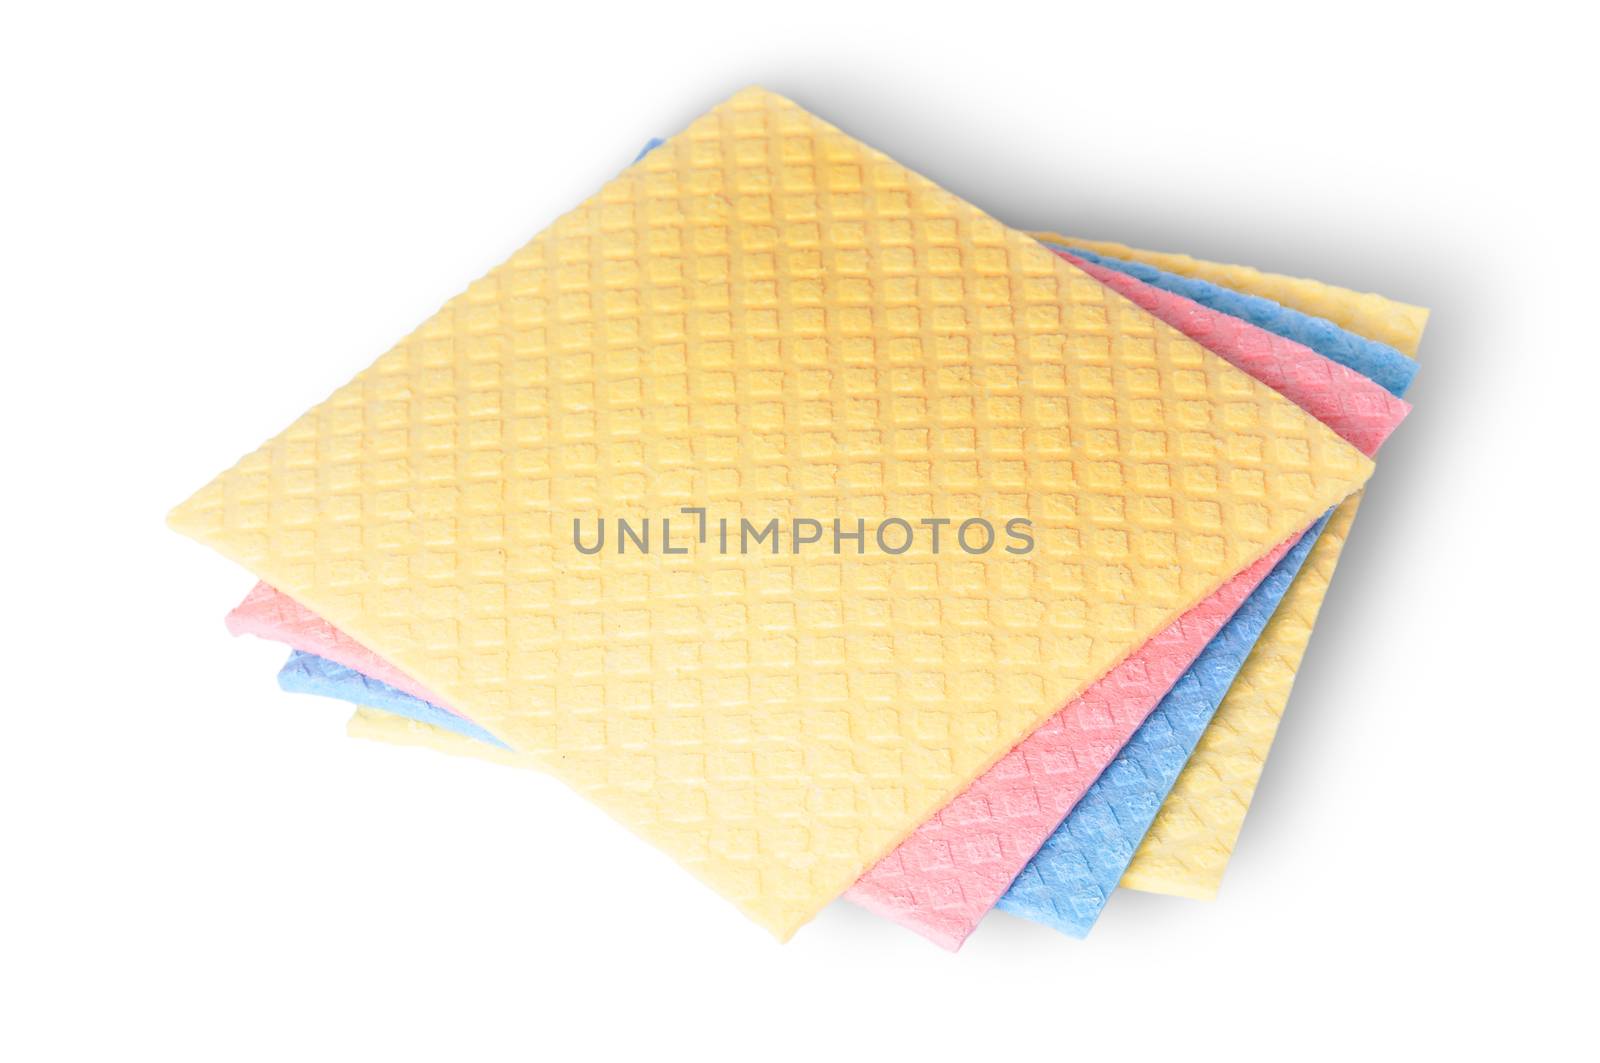 On top multicolored sponges for dishwashing isolated on white background